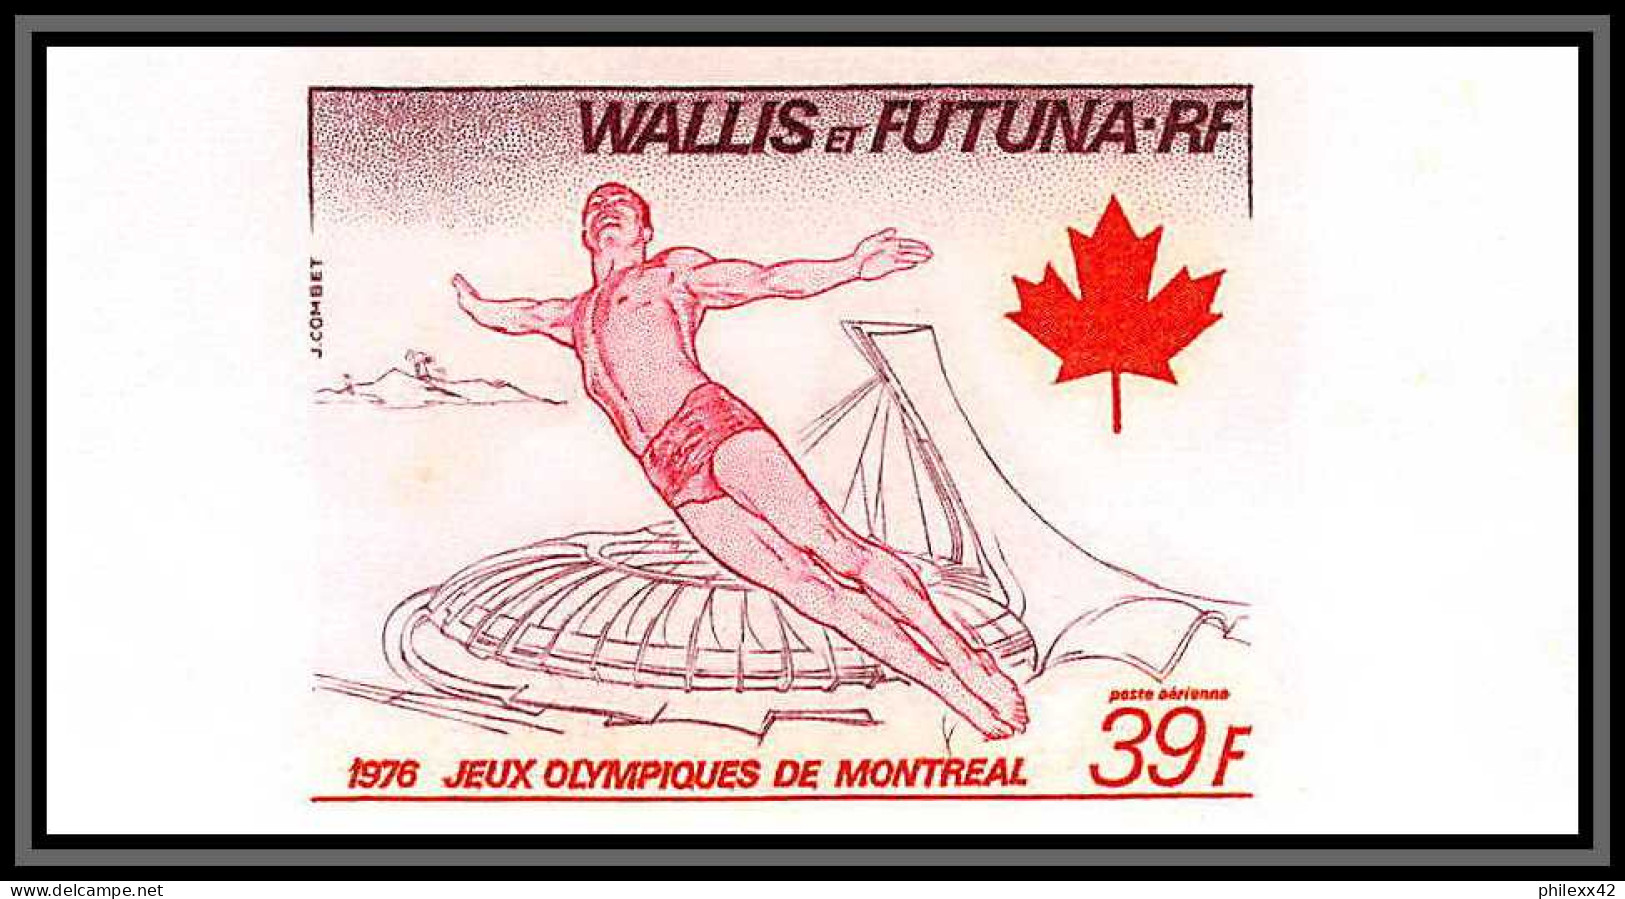 91822b Wallis Et Futuna PA N° 73 Plongeon Diving Montreal 76 Jeux Olympiques Olympic Games Non Dentelé Imperf ** MNH - Imperforates, Proofs & Errors